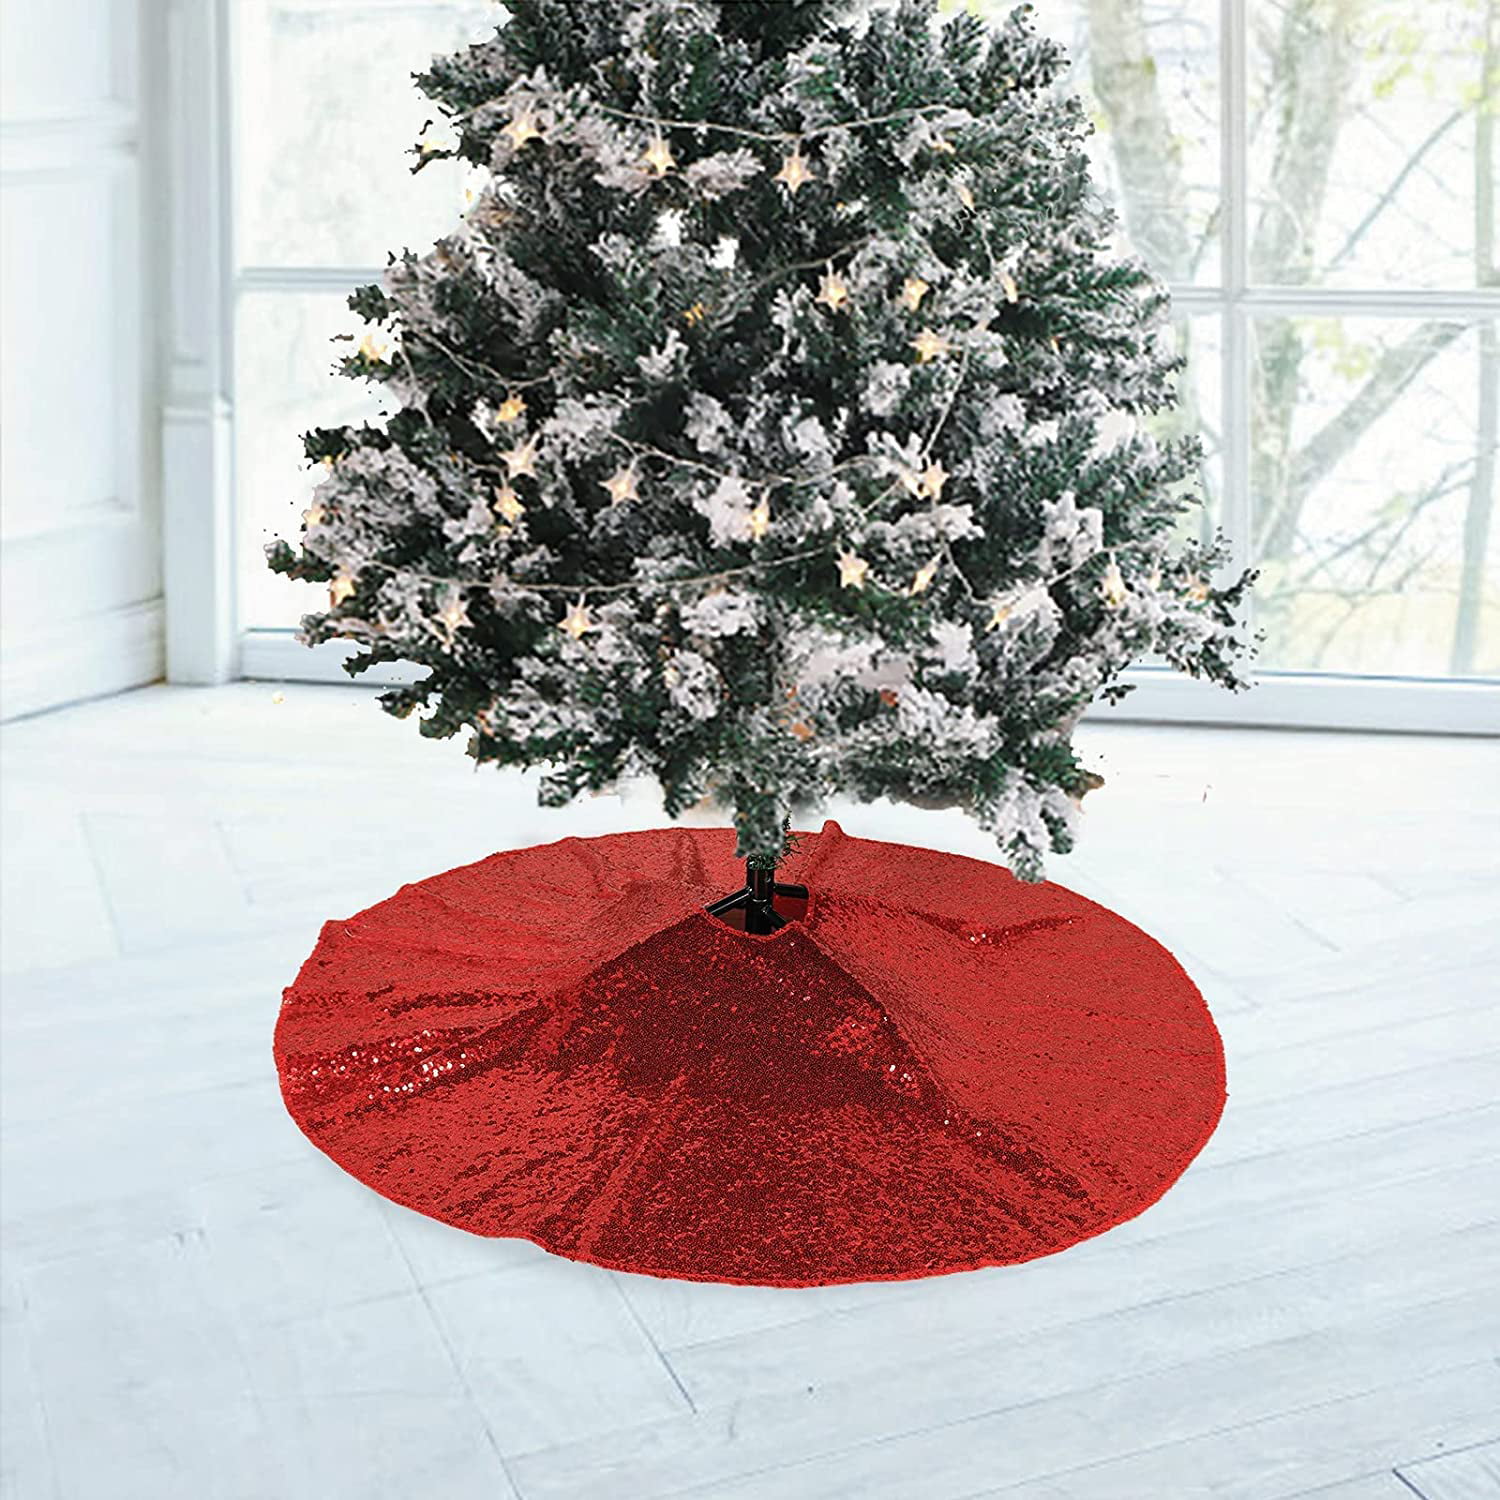 Details about   48 Inches Faux Fur Christmas Tree Skirt w/ Snowflake Pattern for Xmas Decor 